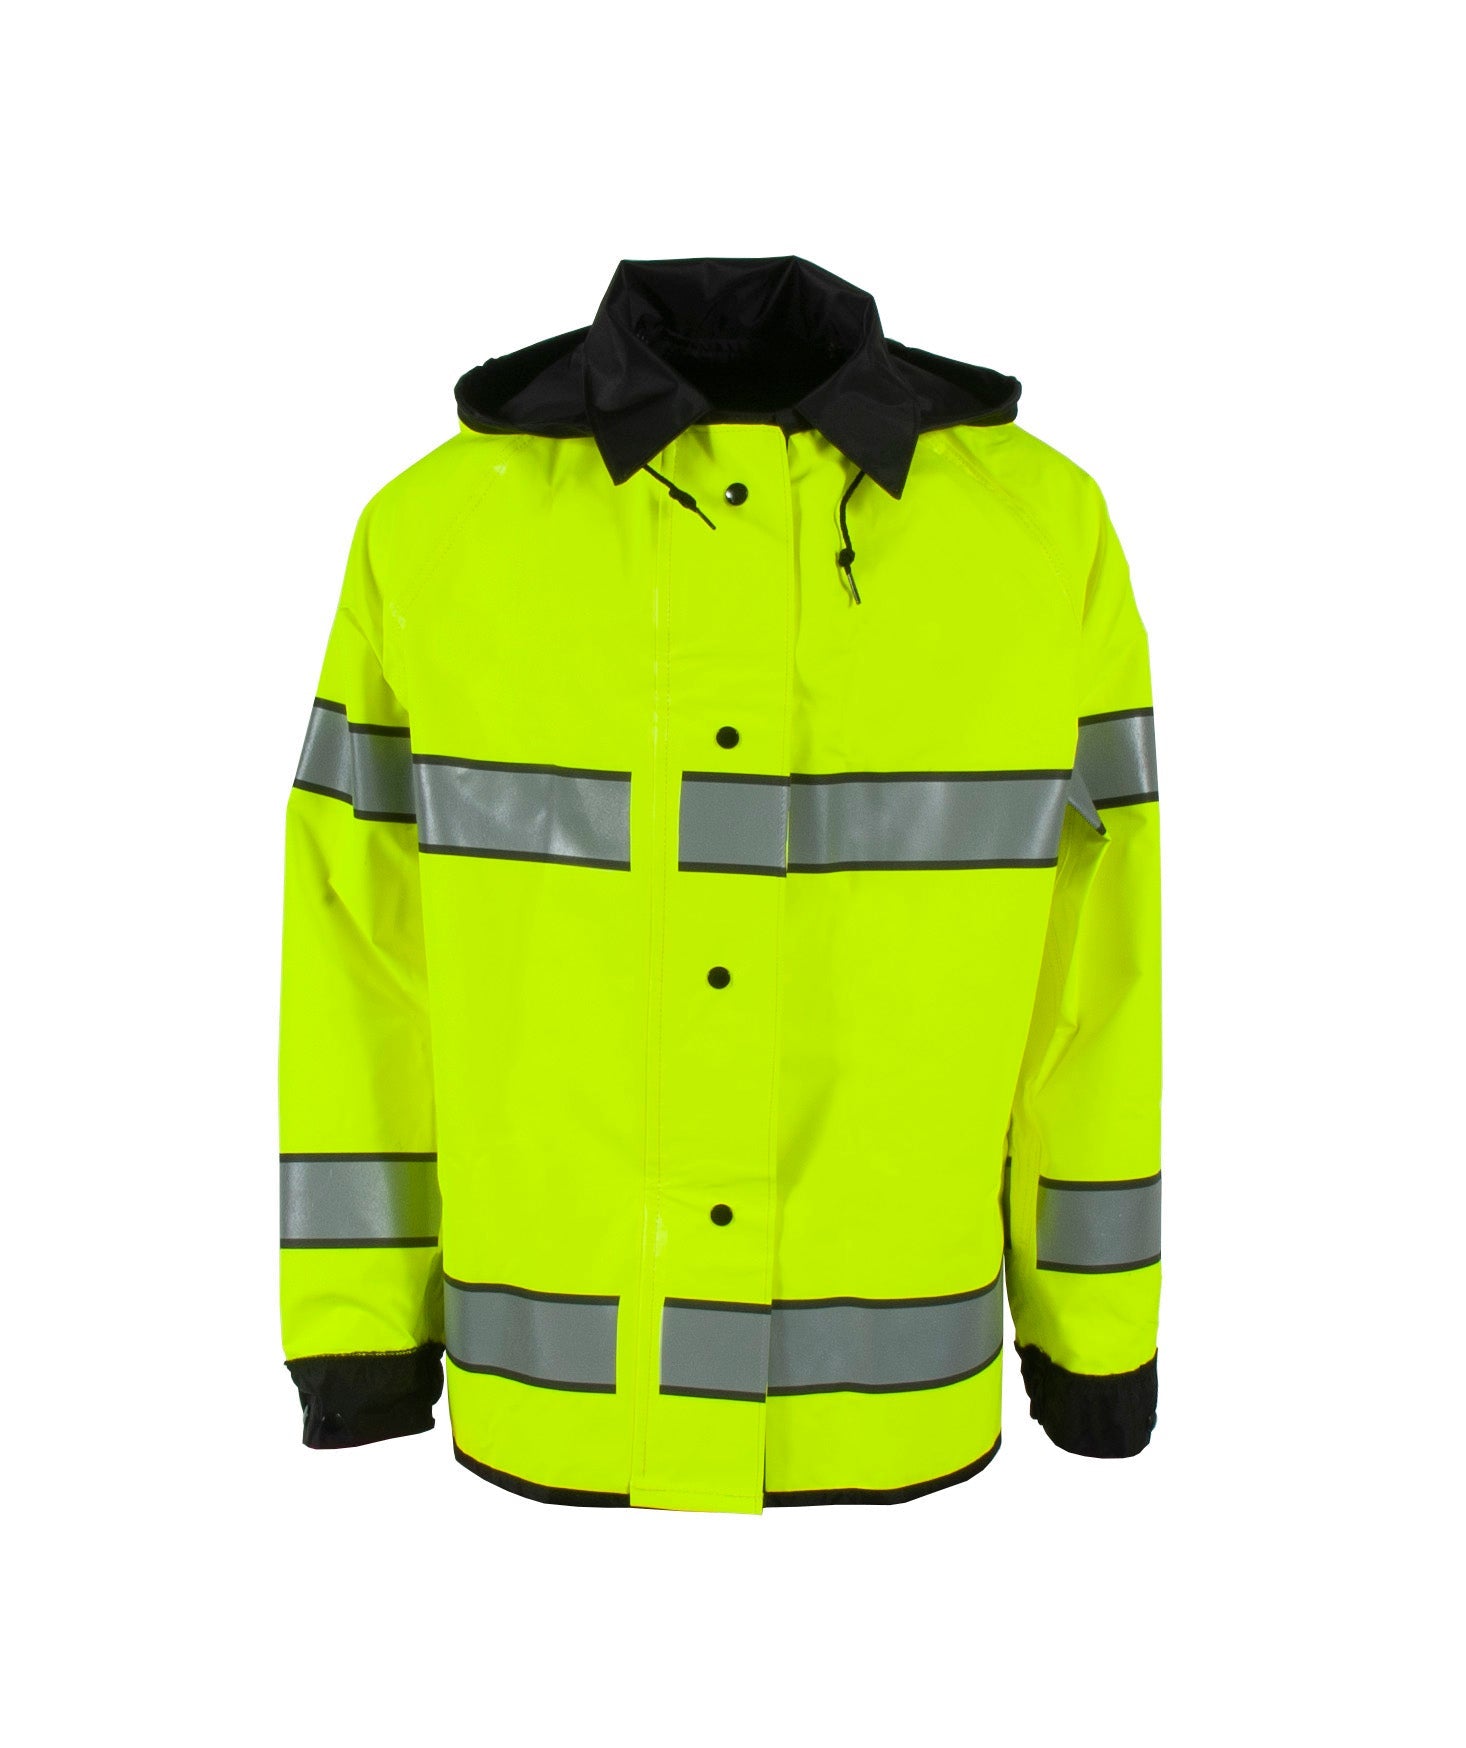 Neese 4703RJH3M Safe Officer Reversible Rain Jacket with Reflective Taping